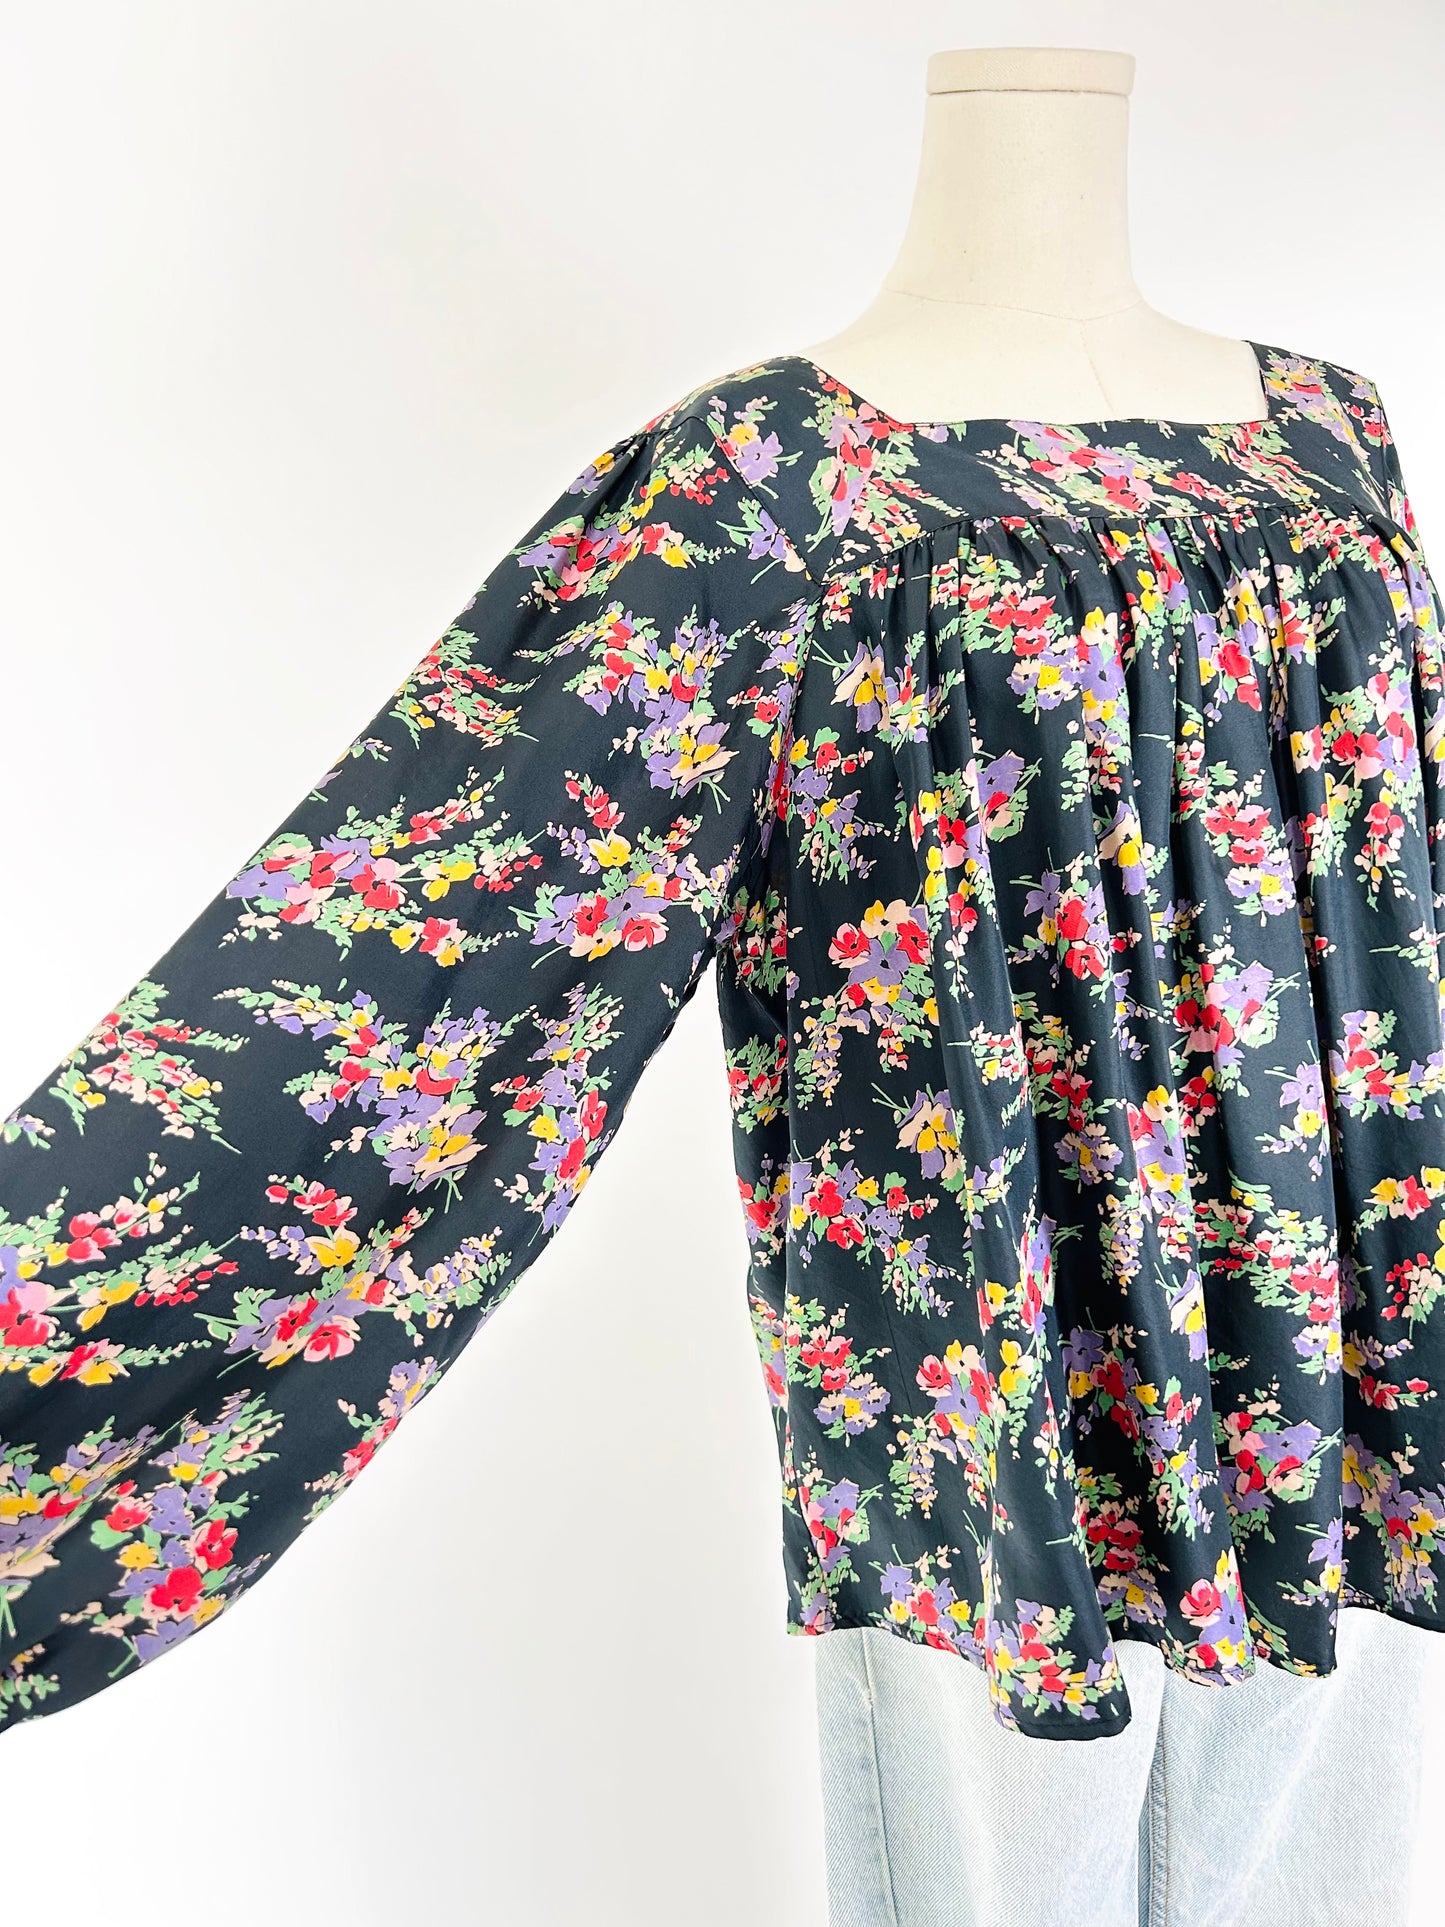 The Great Black Floral Top